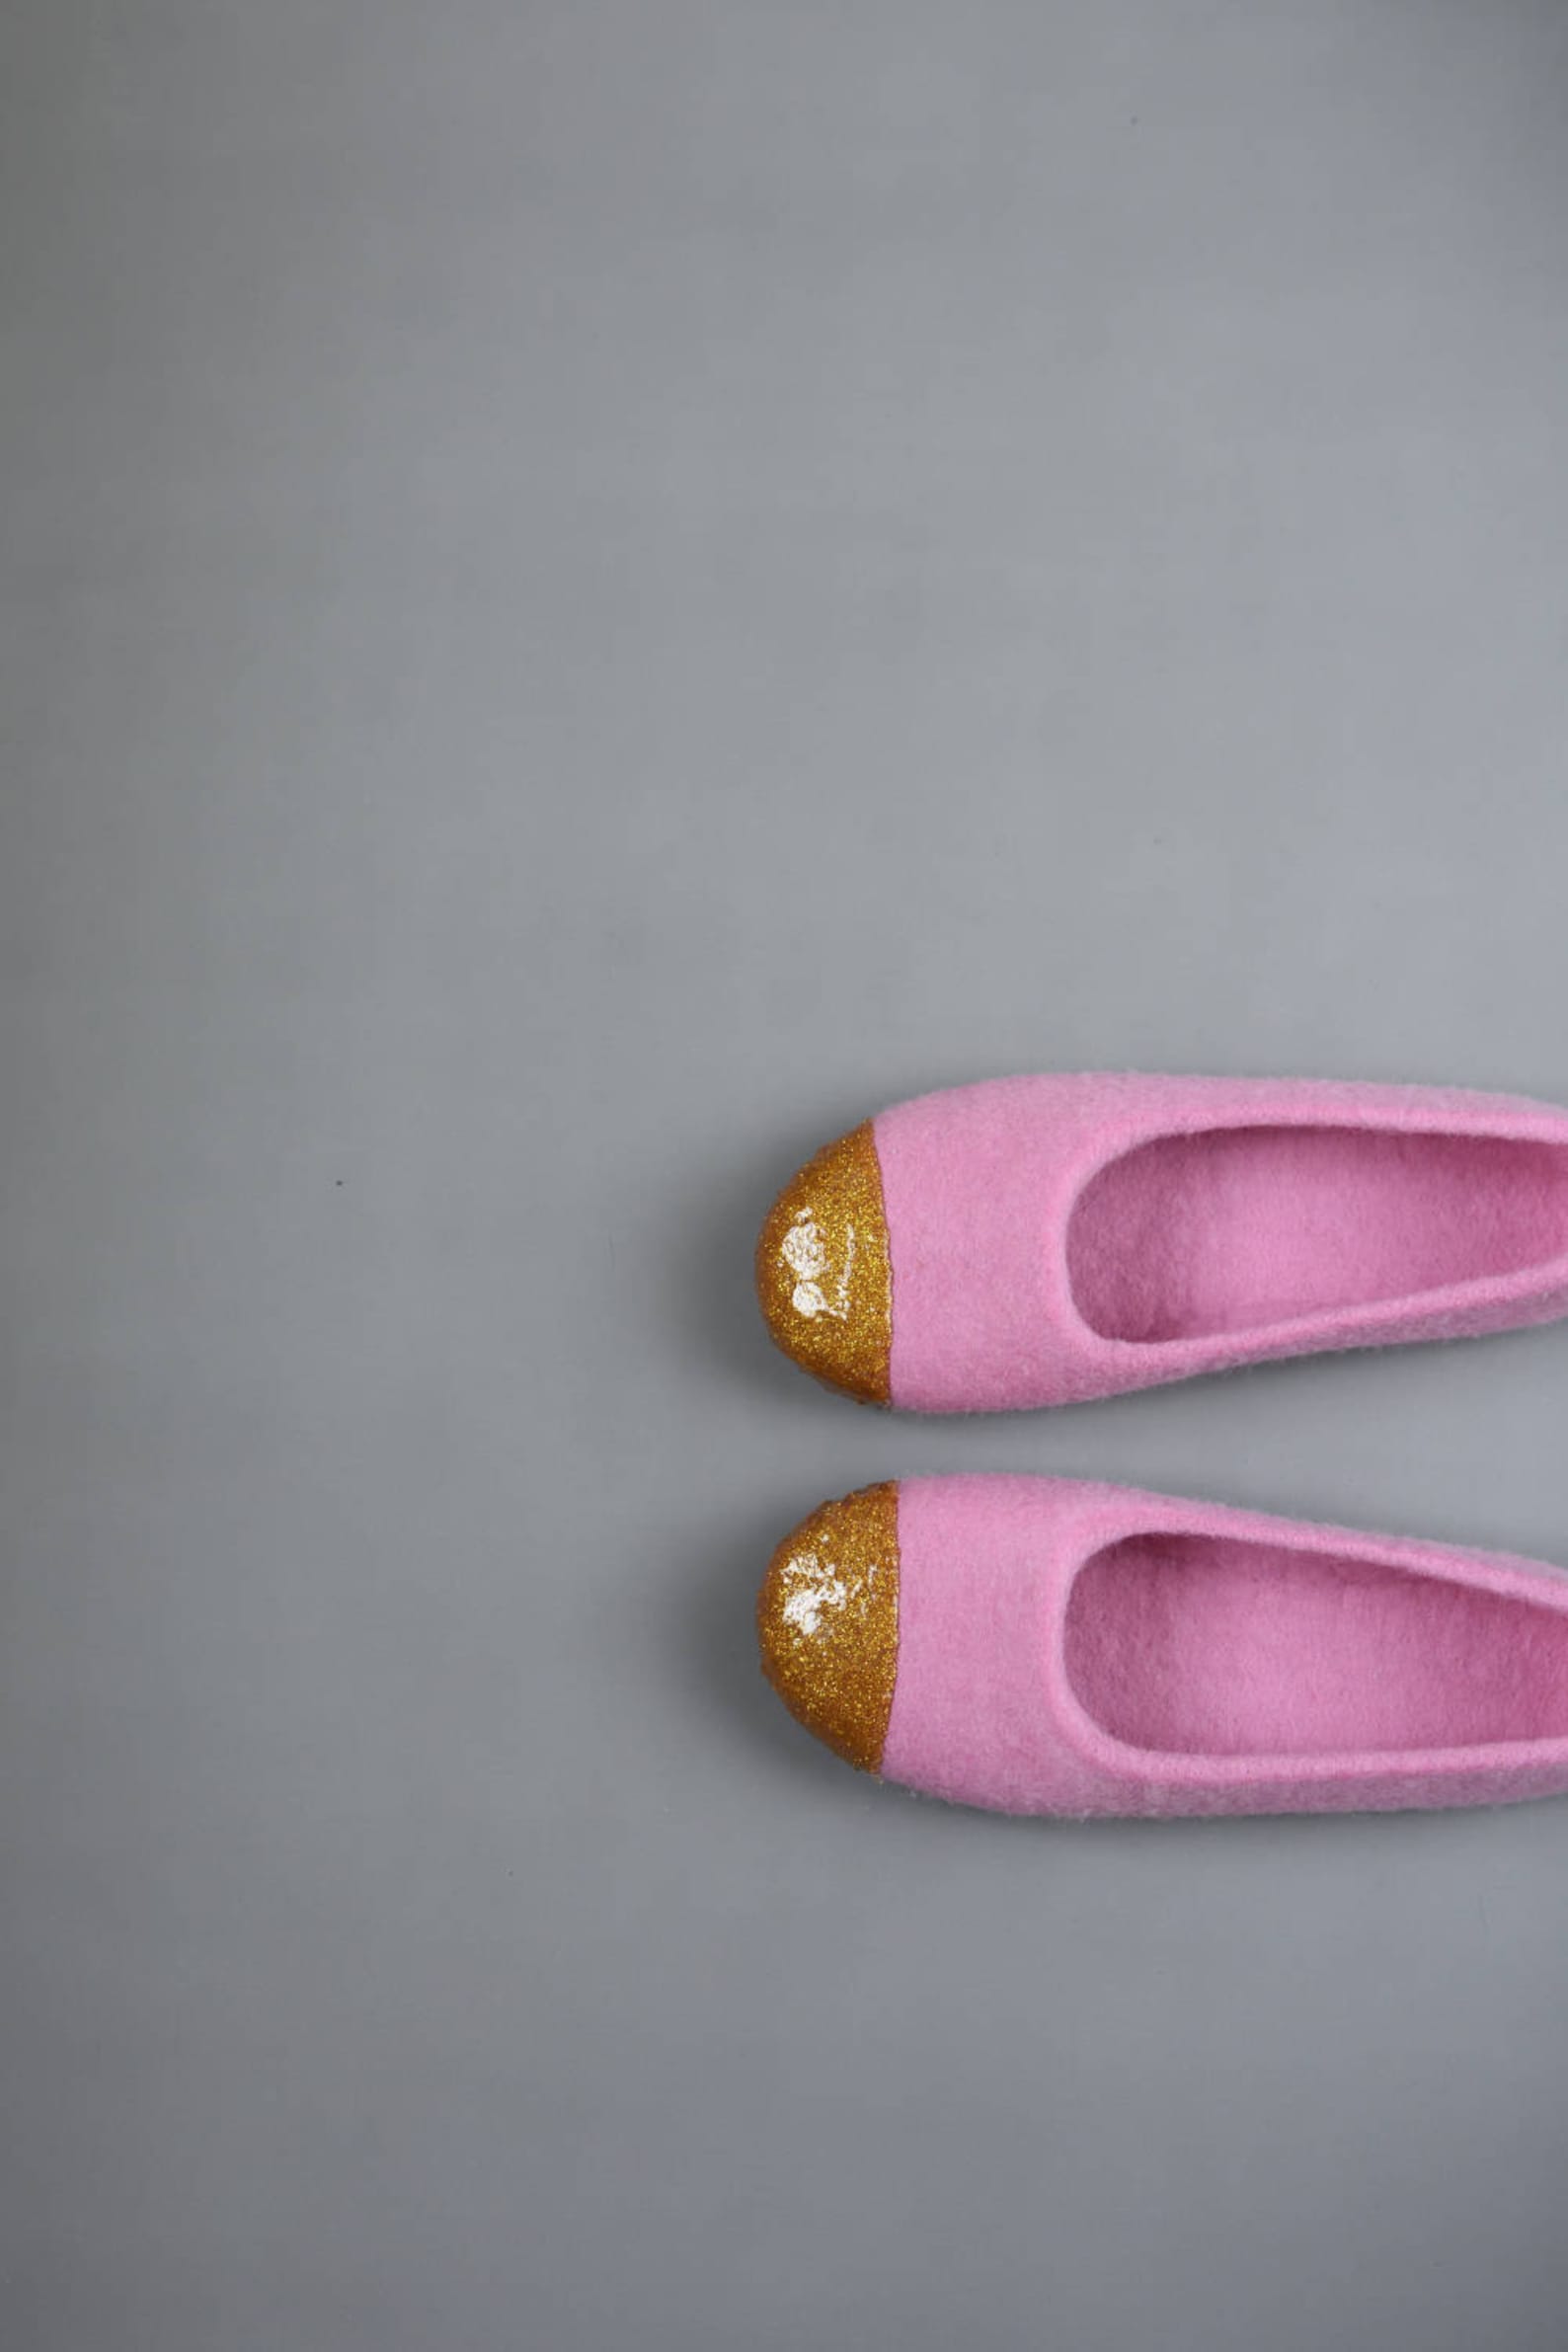 pink felt slippers for women felted ballet flats - felted slippers with gold glitter decoration hand dyed organic wool slippers